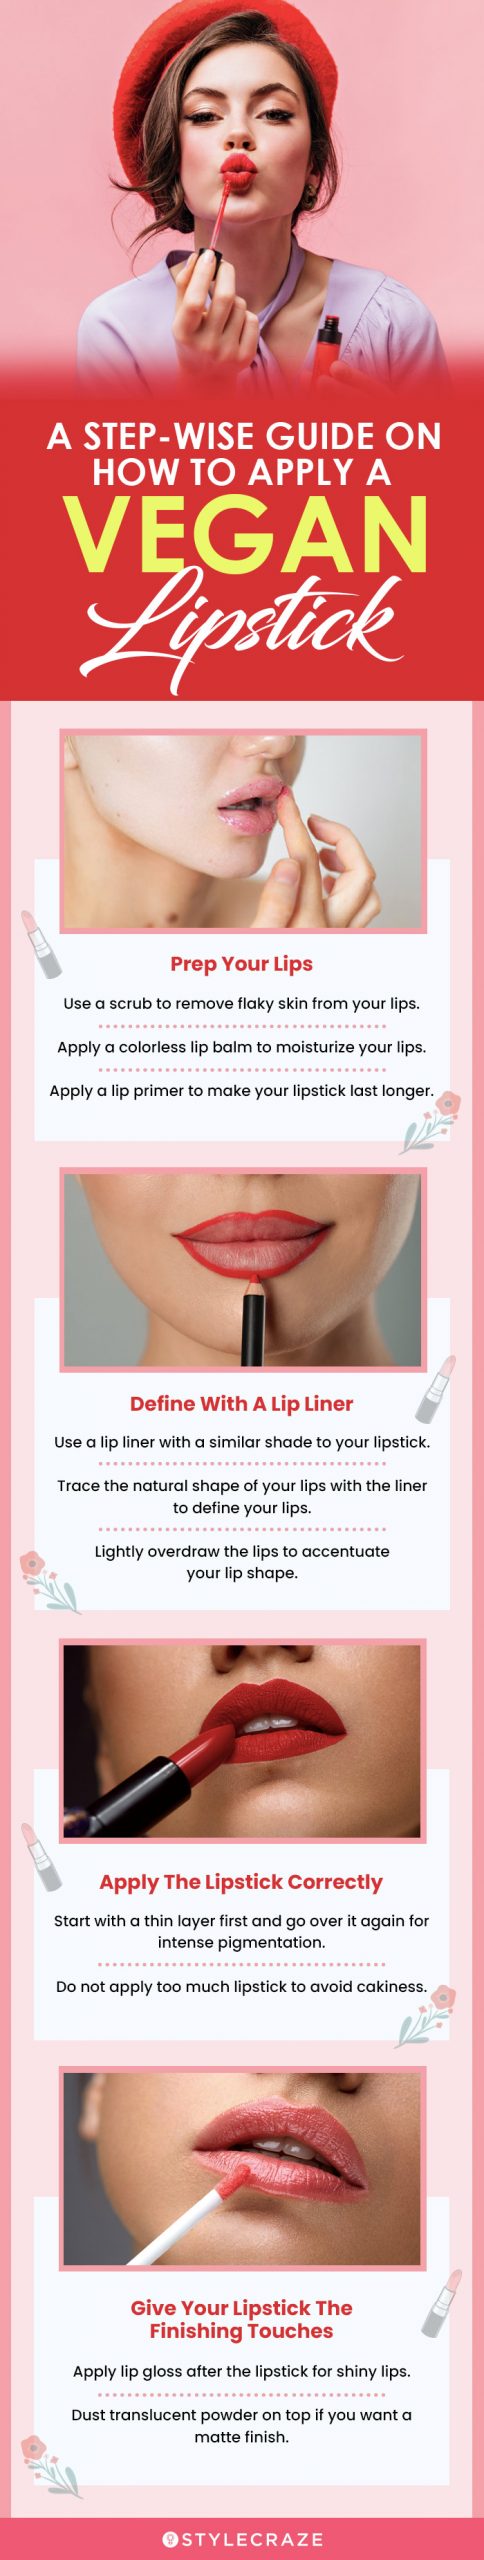 A Step Wise Guide On How To Apply A Vegan Lipstick (infographic)